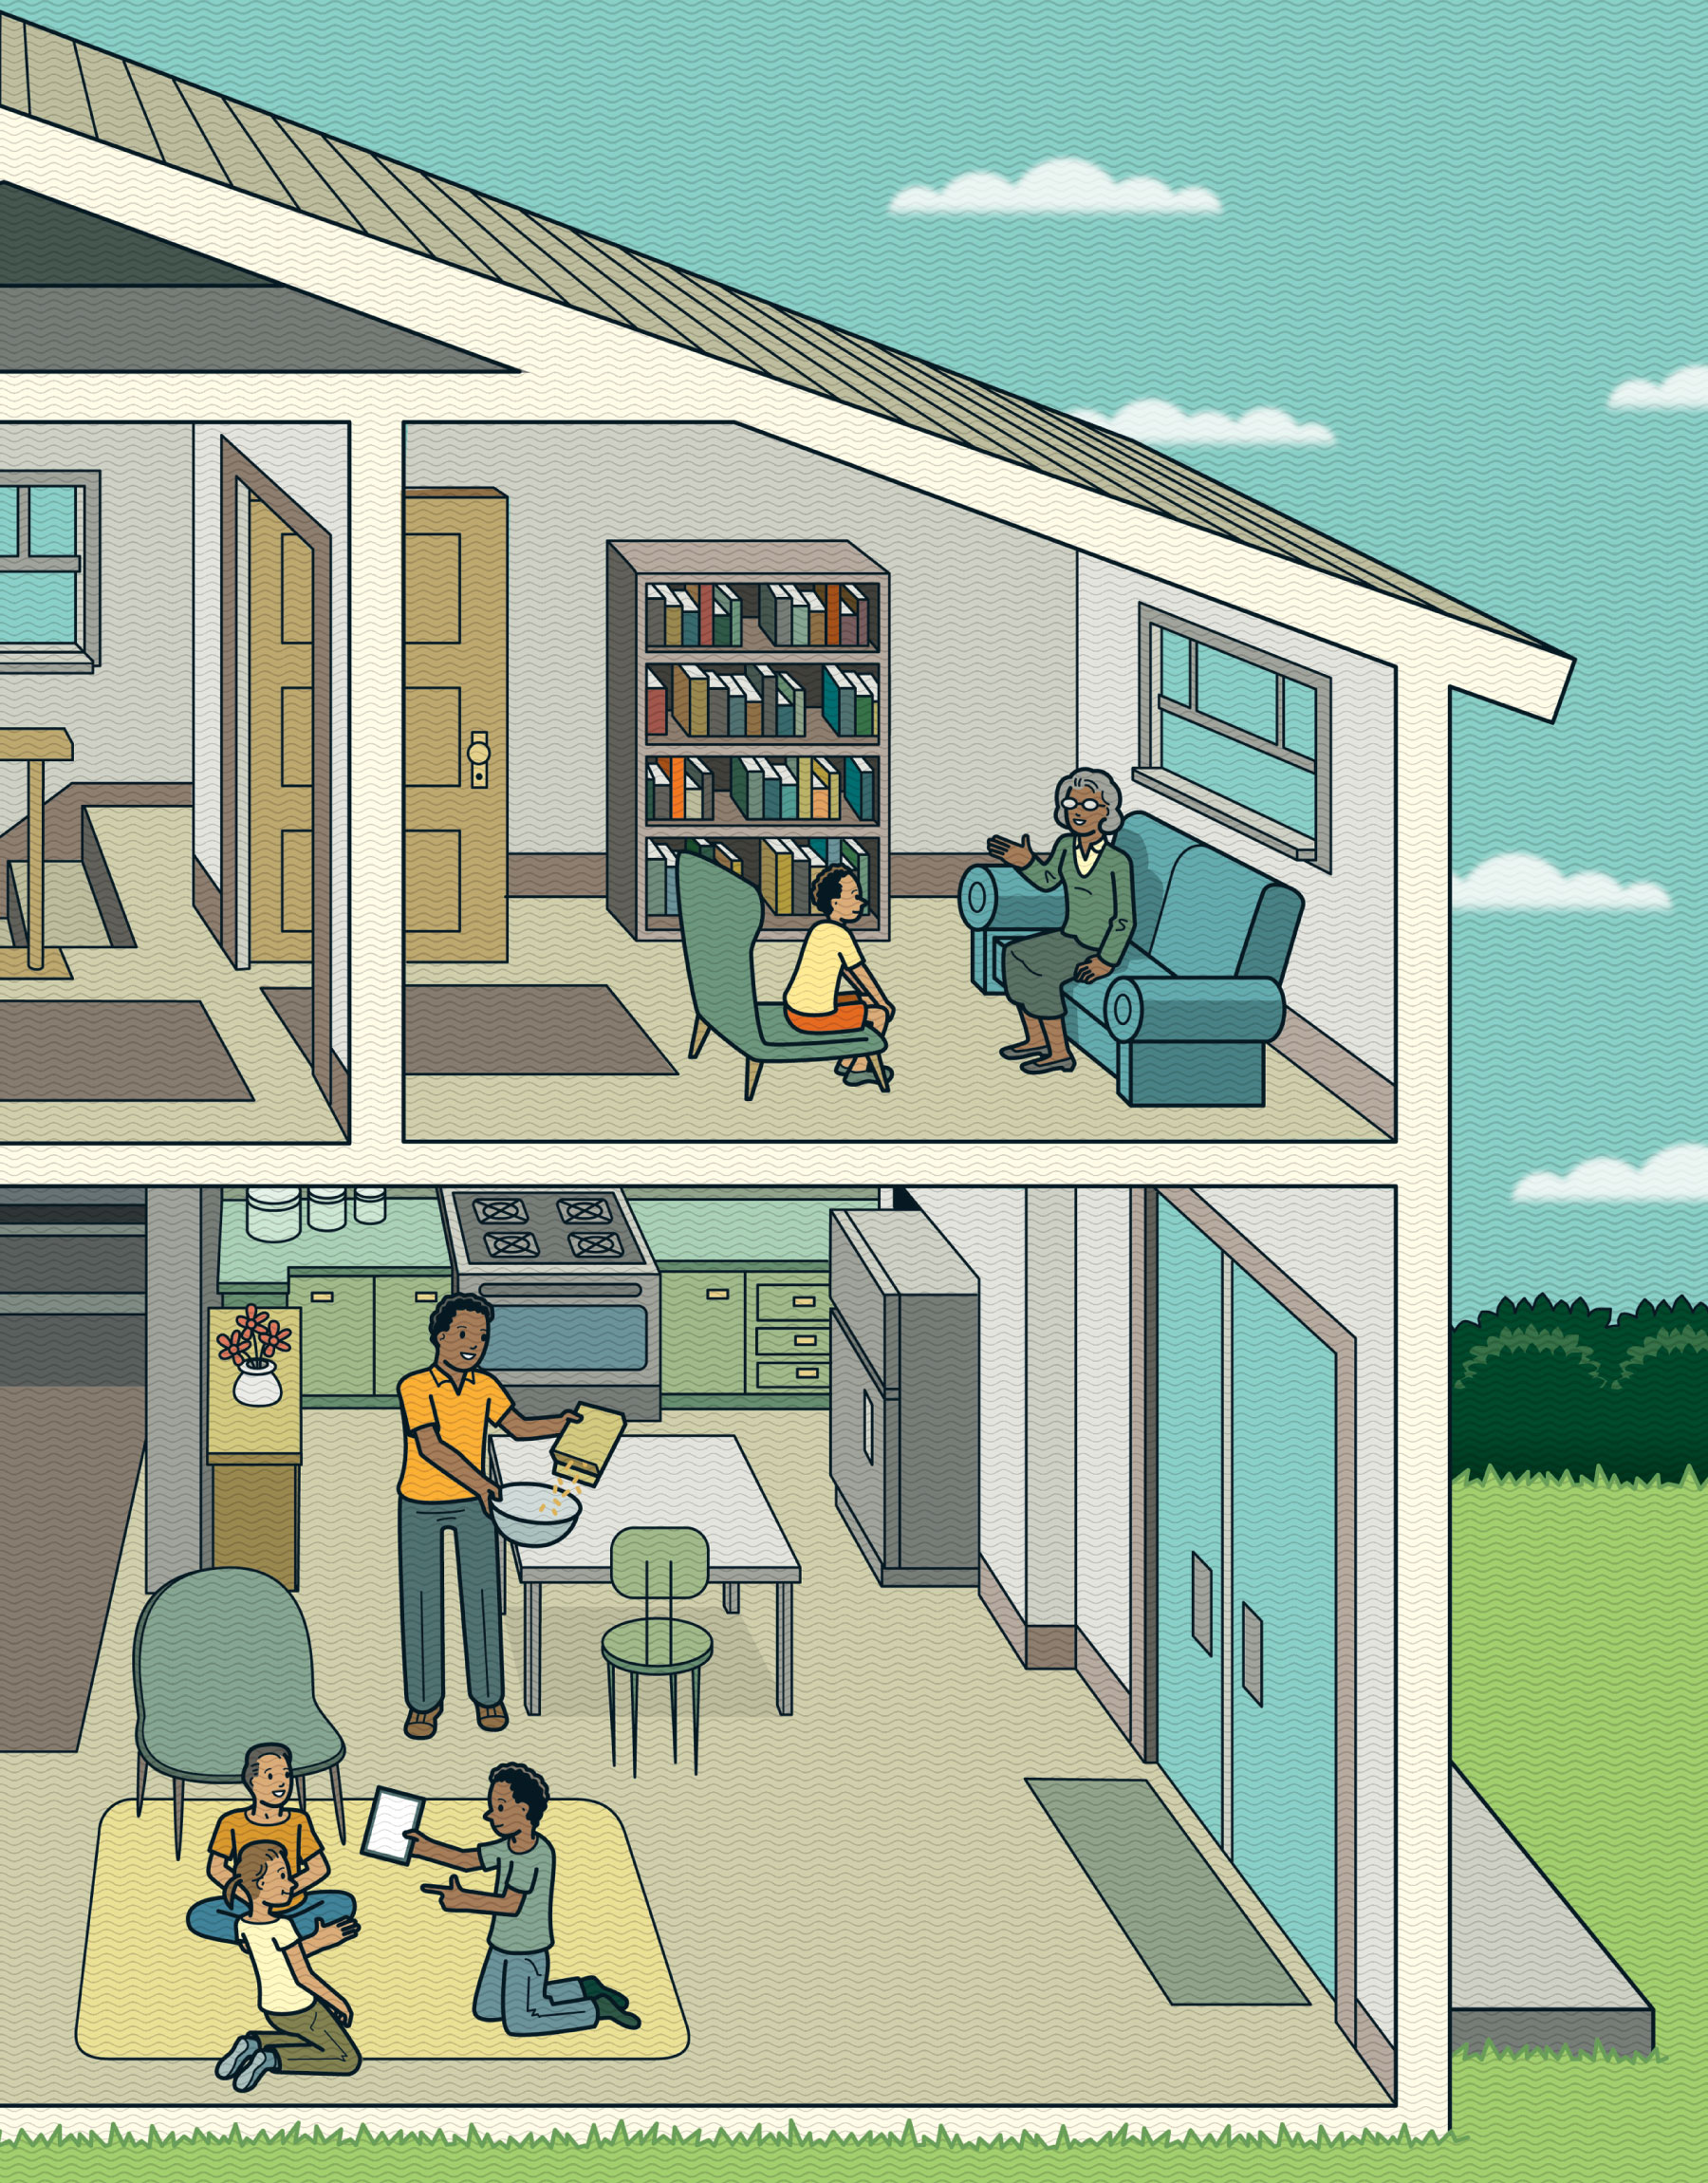 Illustration of an interior home with 2 families talking